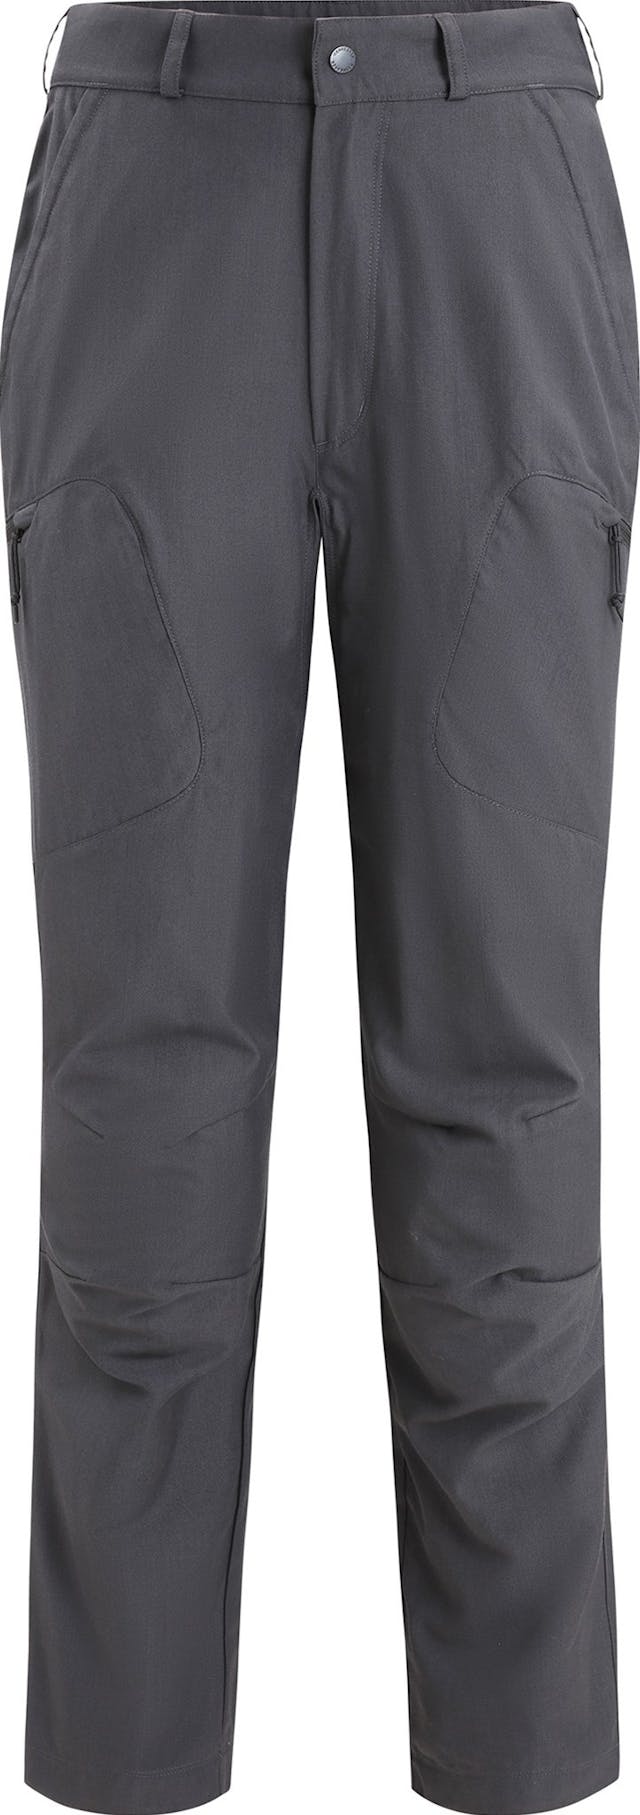 Product image for Hike Pants - Women's